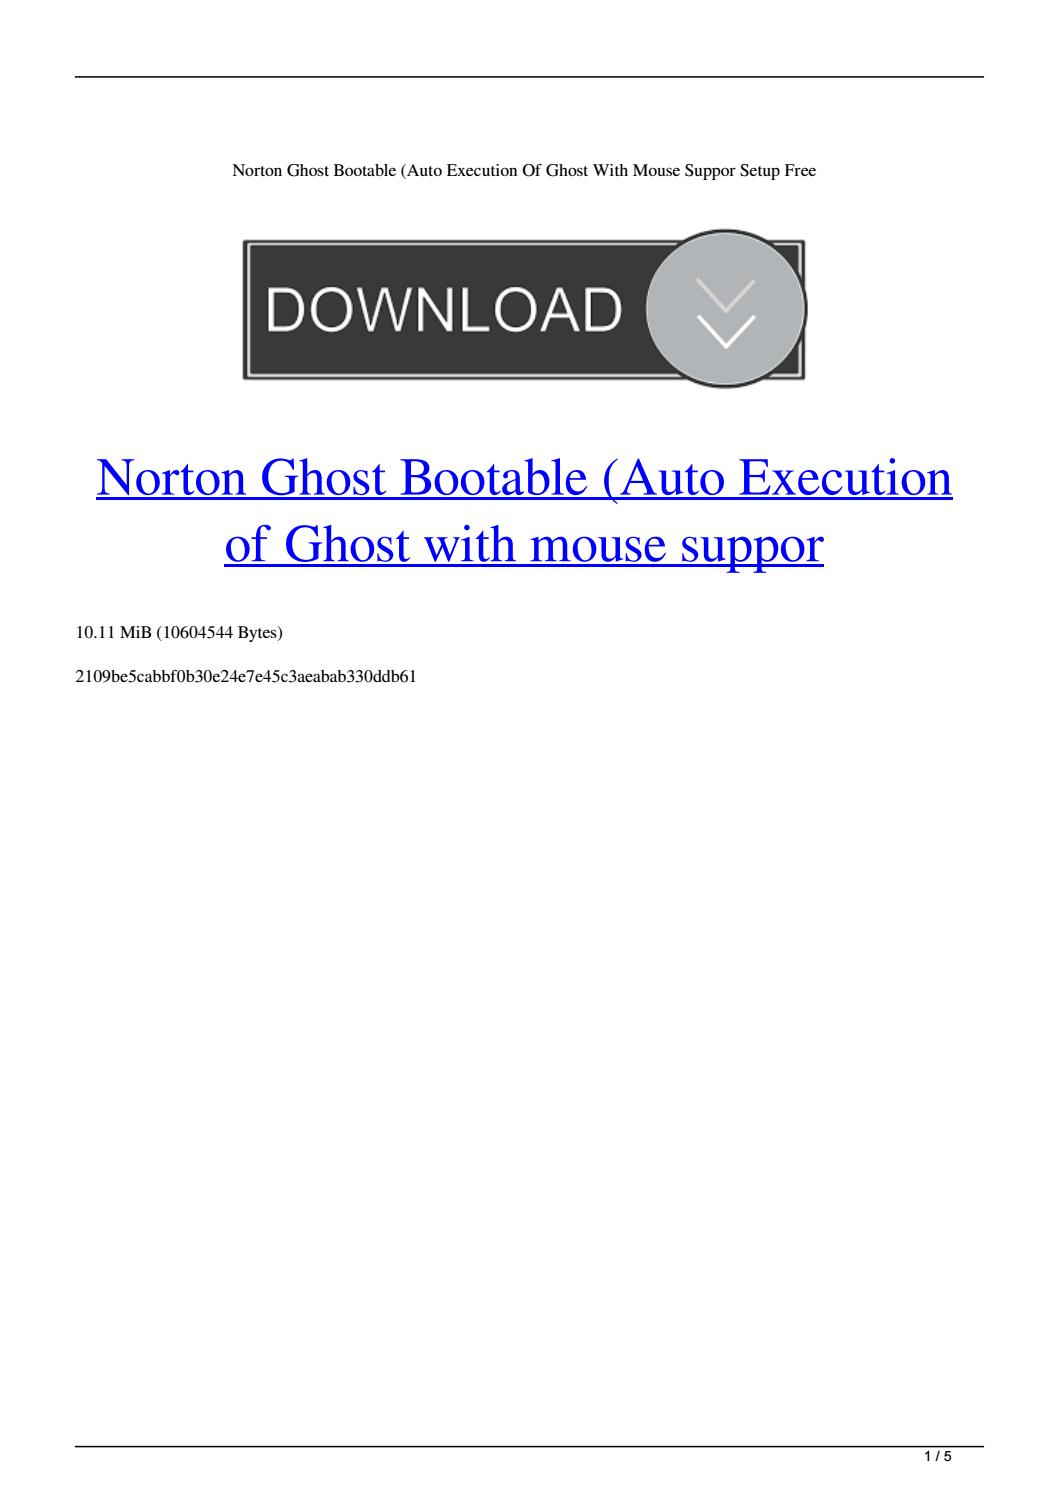 ghost bootable usb software free download